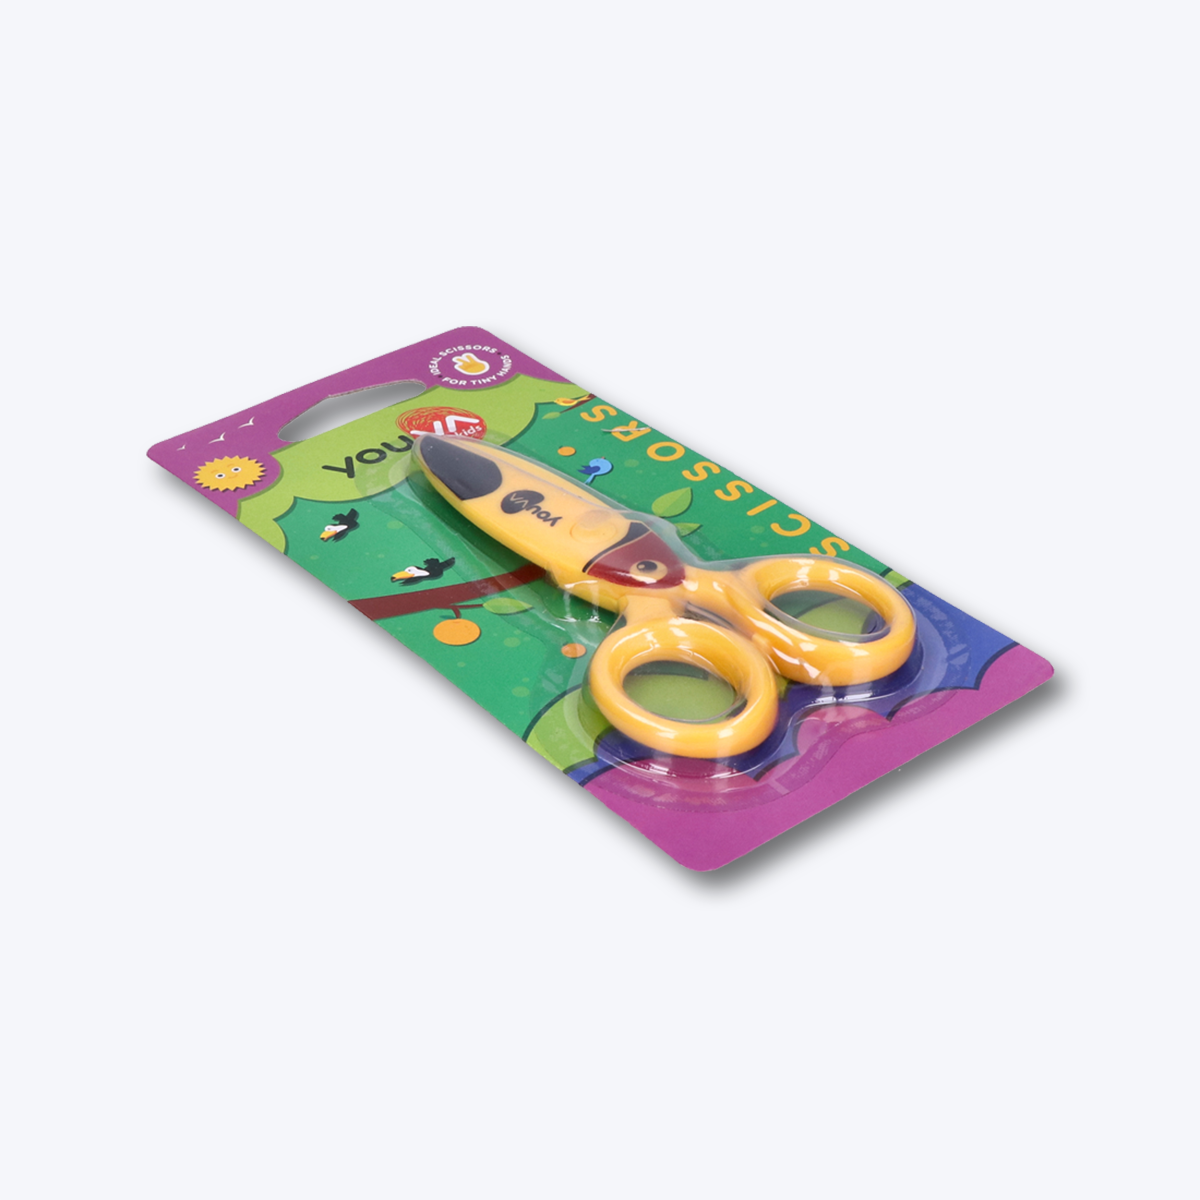 Navneet Youva | Scissors Assorted Shapes - Age group 6-9 years | Safe for kids | Pack of 1 | 3 Shapes - Crocodile, Acua Whale, Toucan